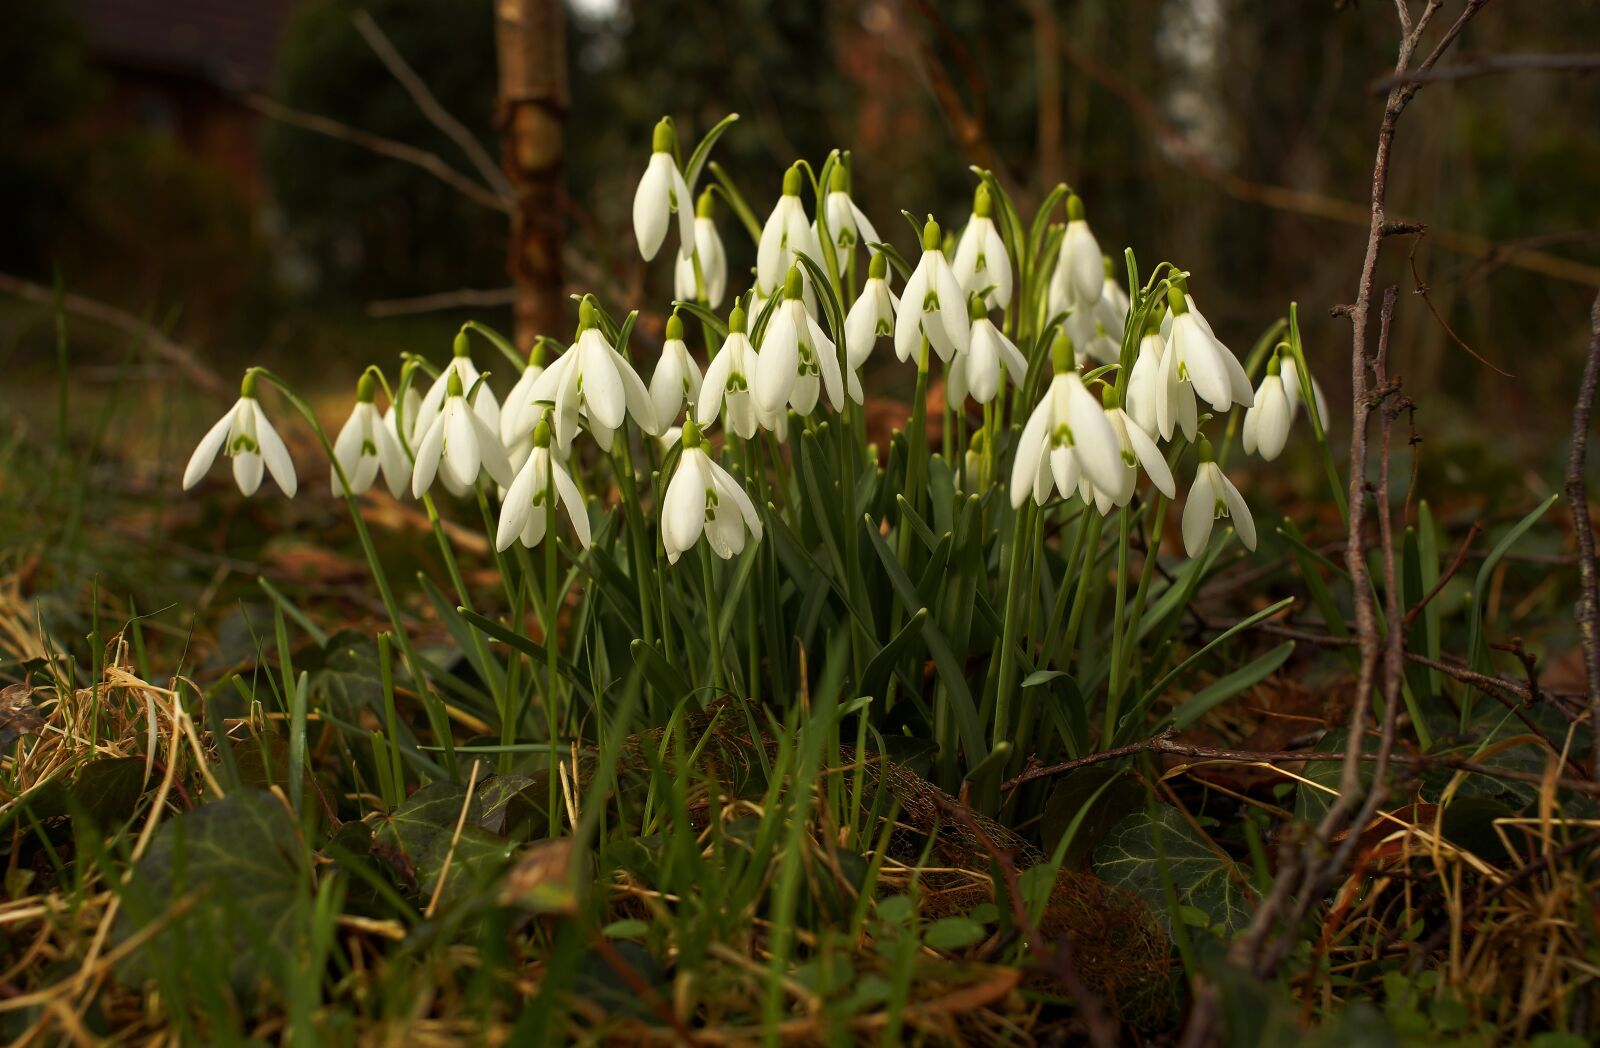 Sony a99 II sample photo. Snowdrop, flowers, spring photography